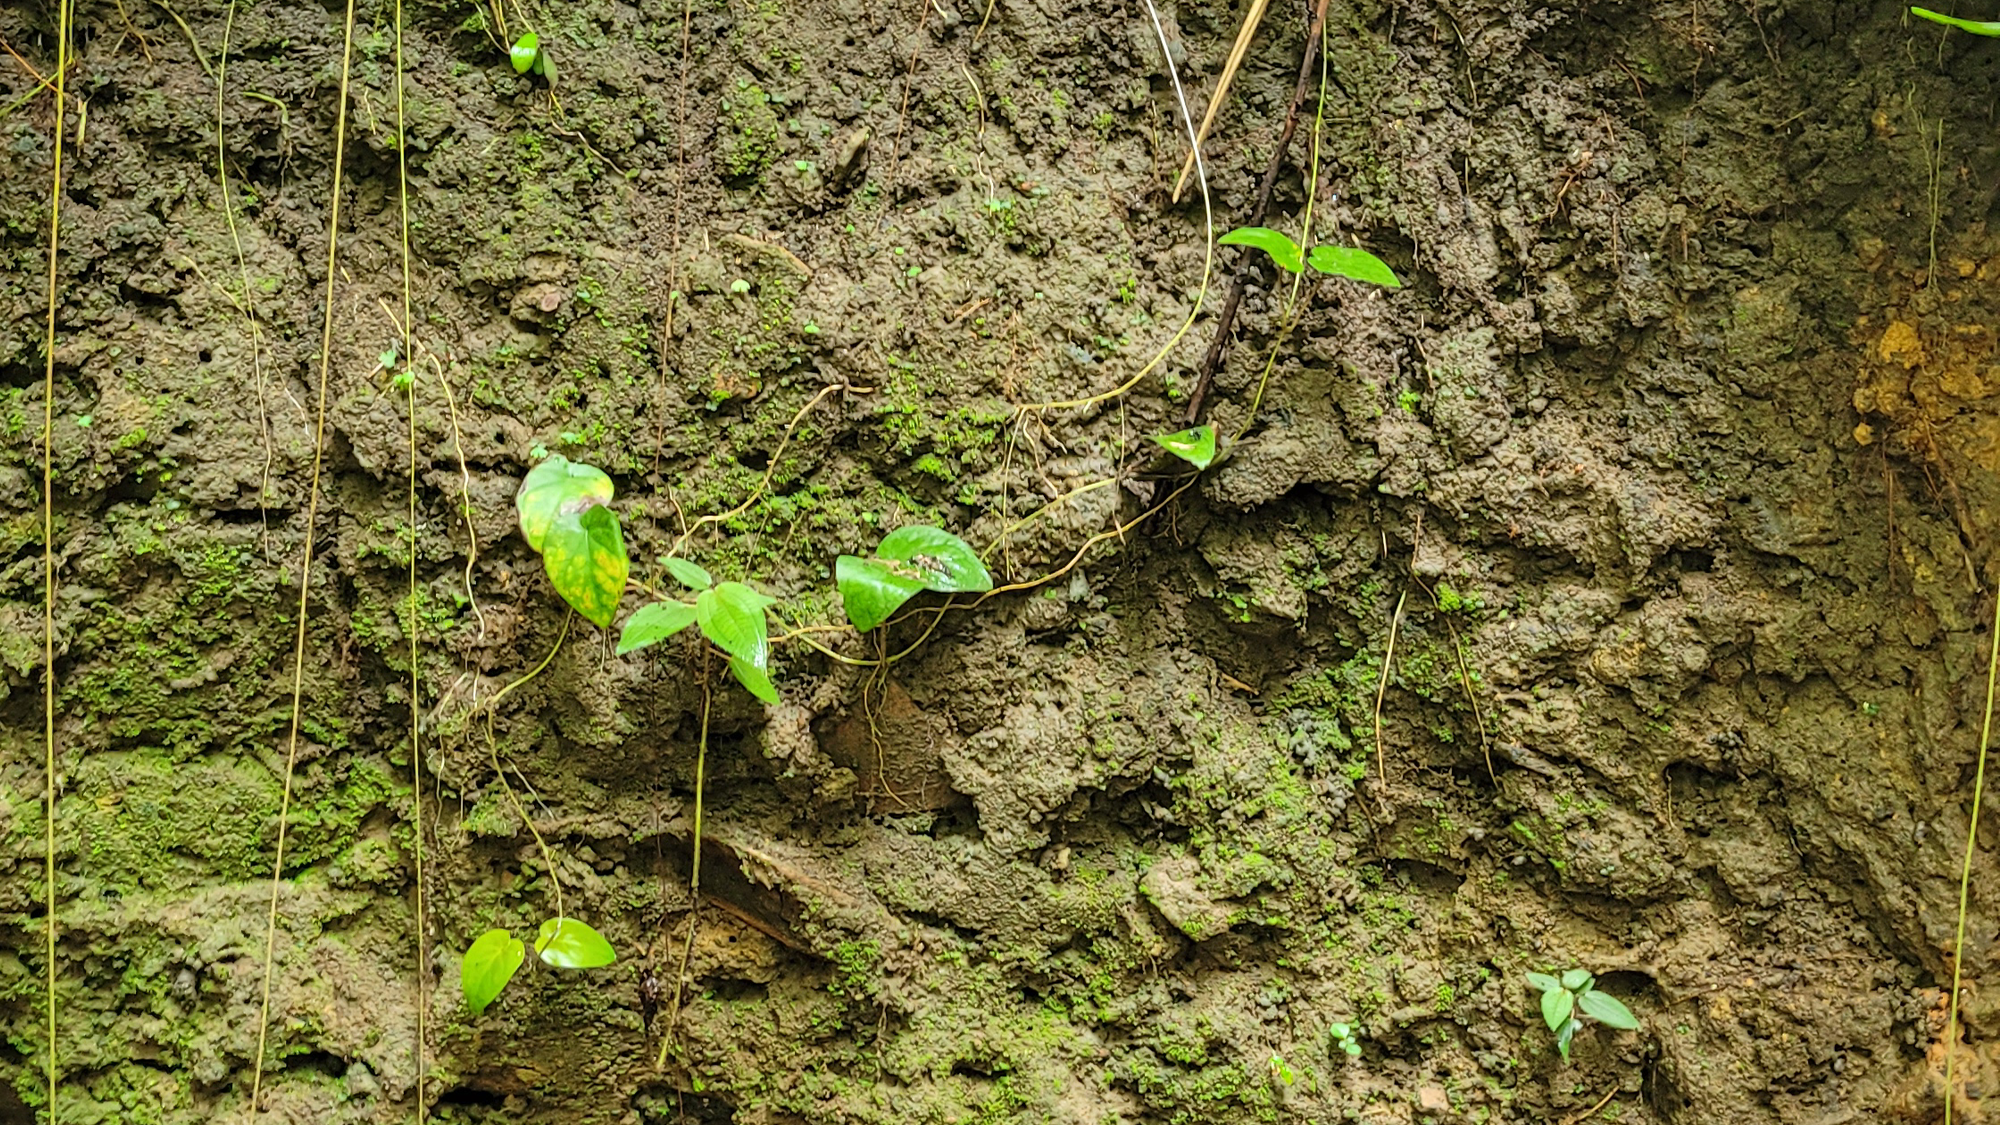 How 2,000-year-old soil could be a lifeline for the Amazon rainforest